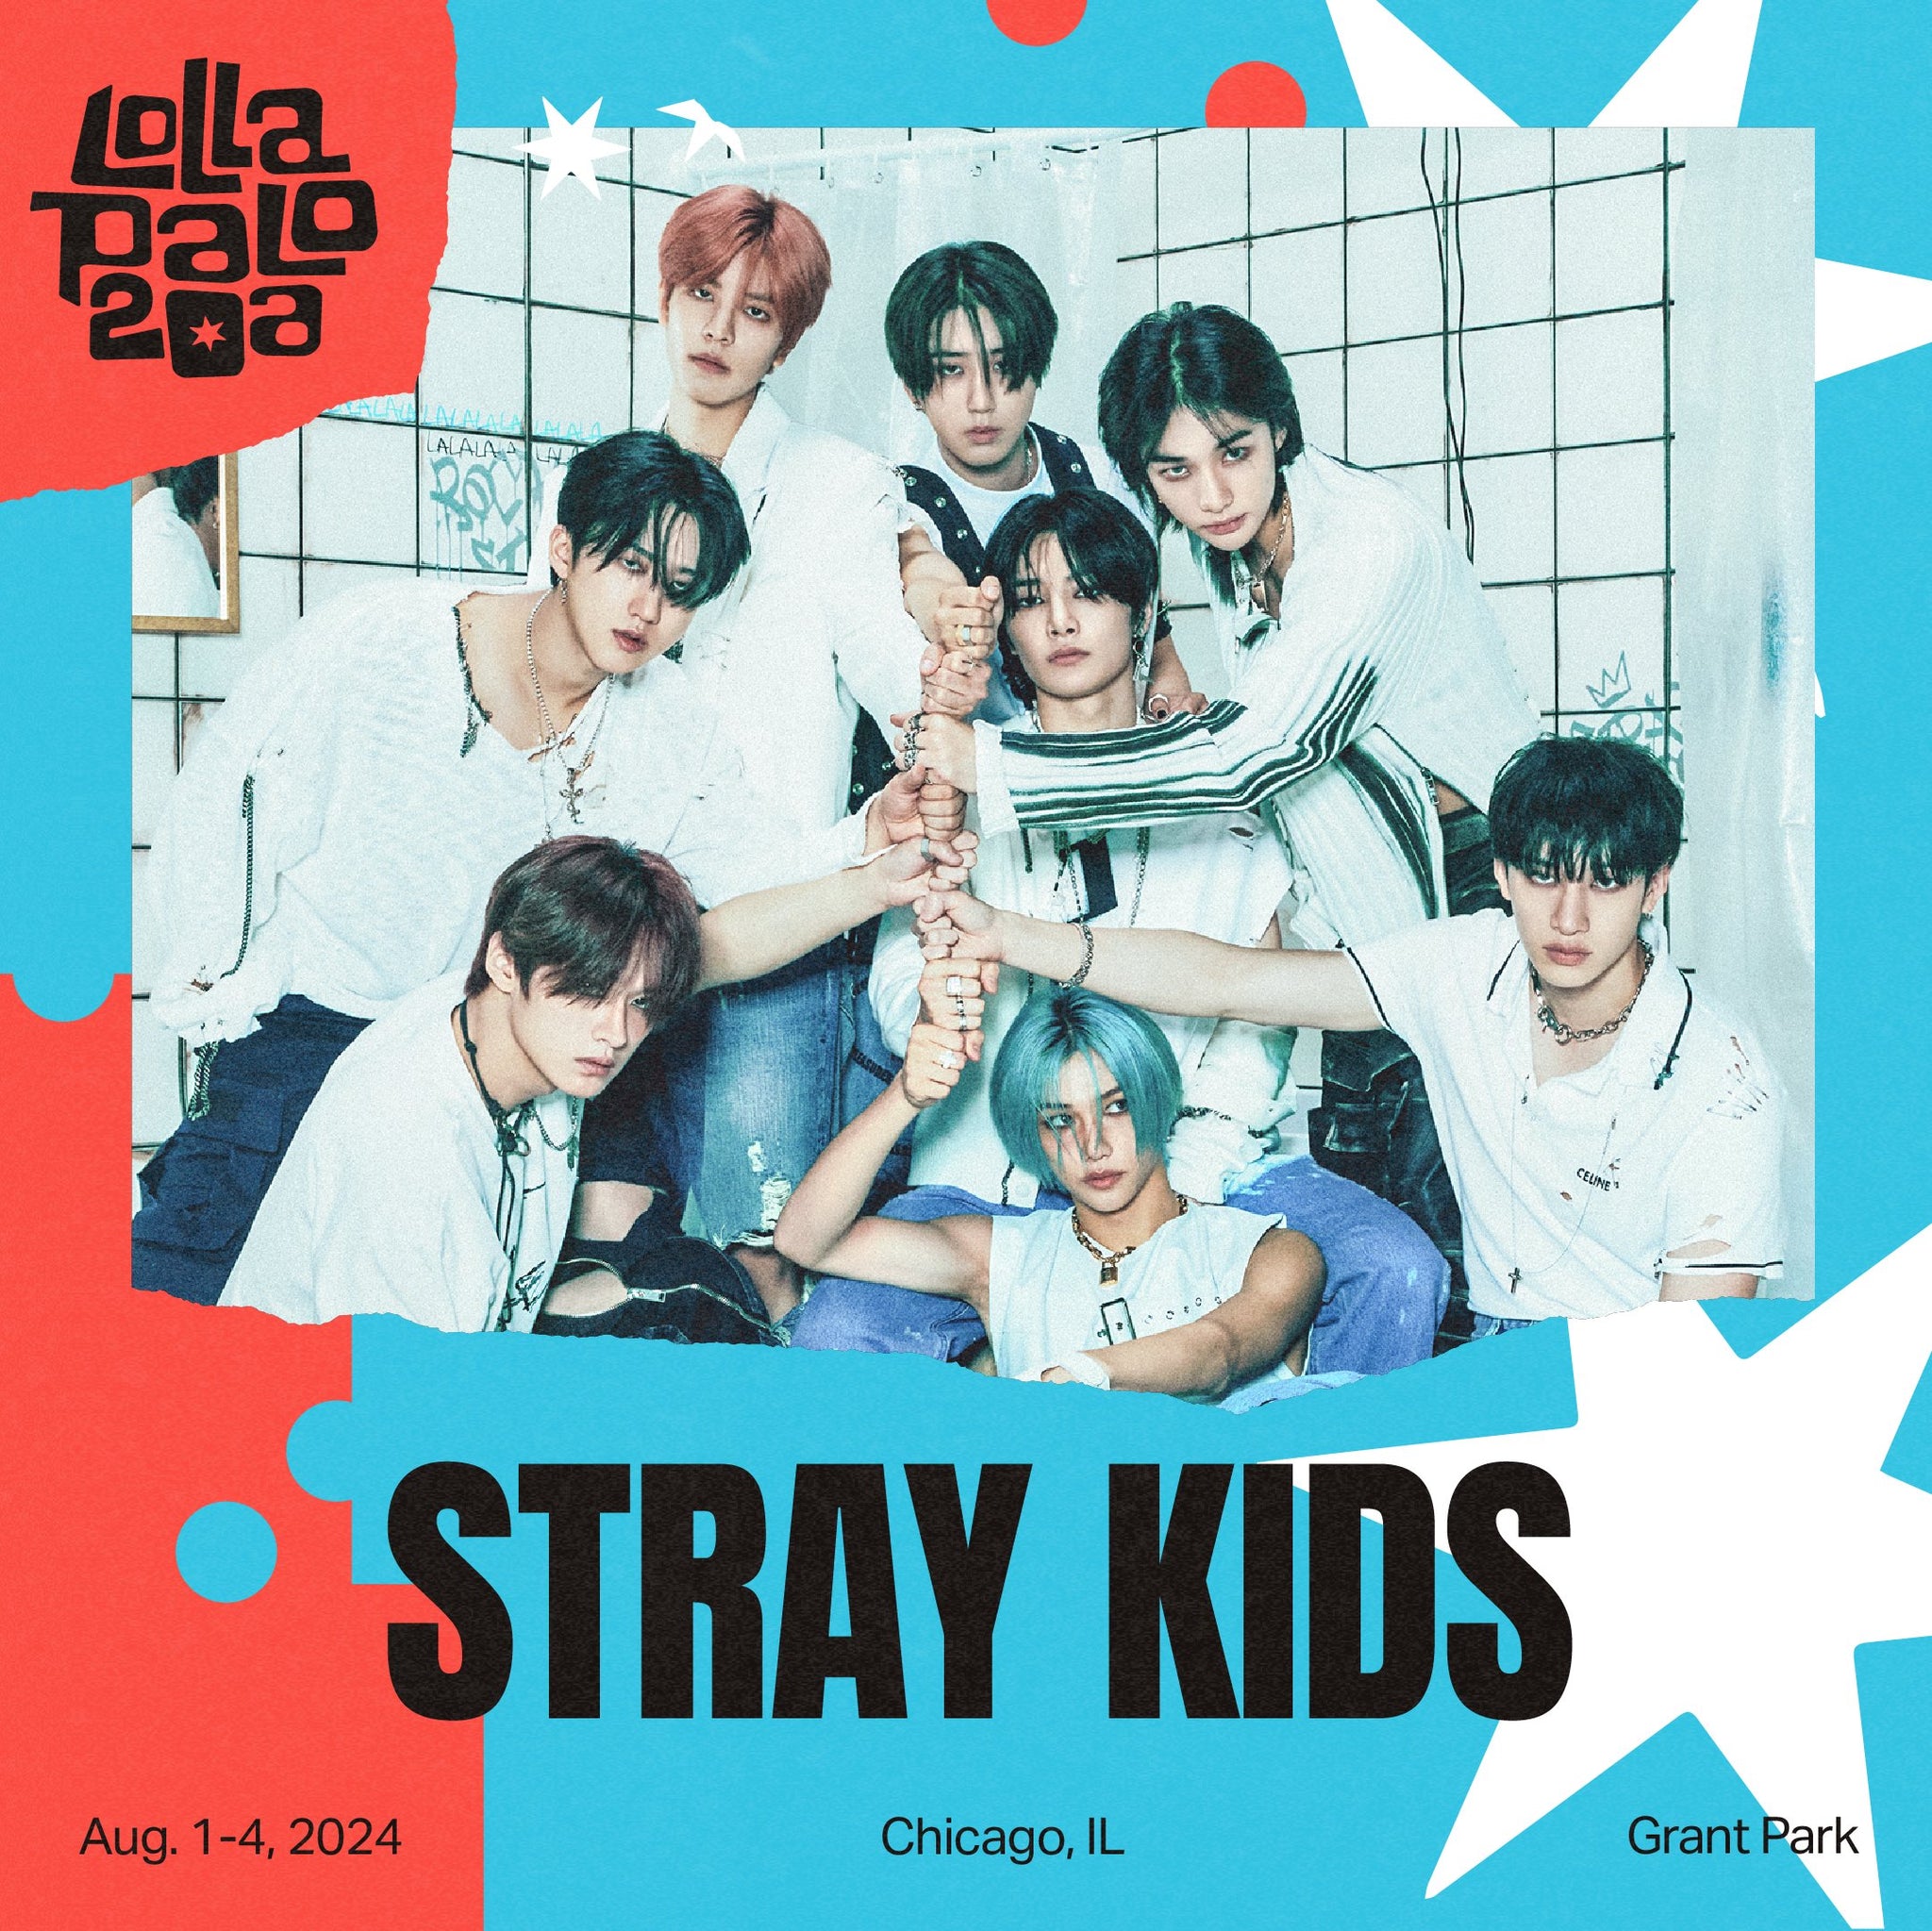 [Kpop Planet News] Stray Kids To Perform At Lollapalooza Chicago In August